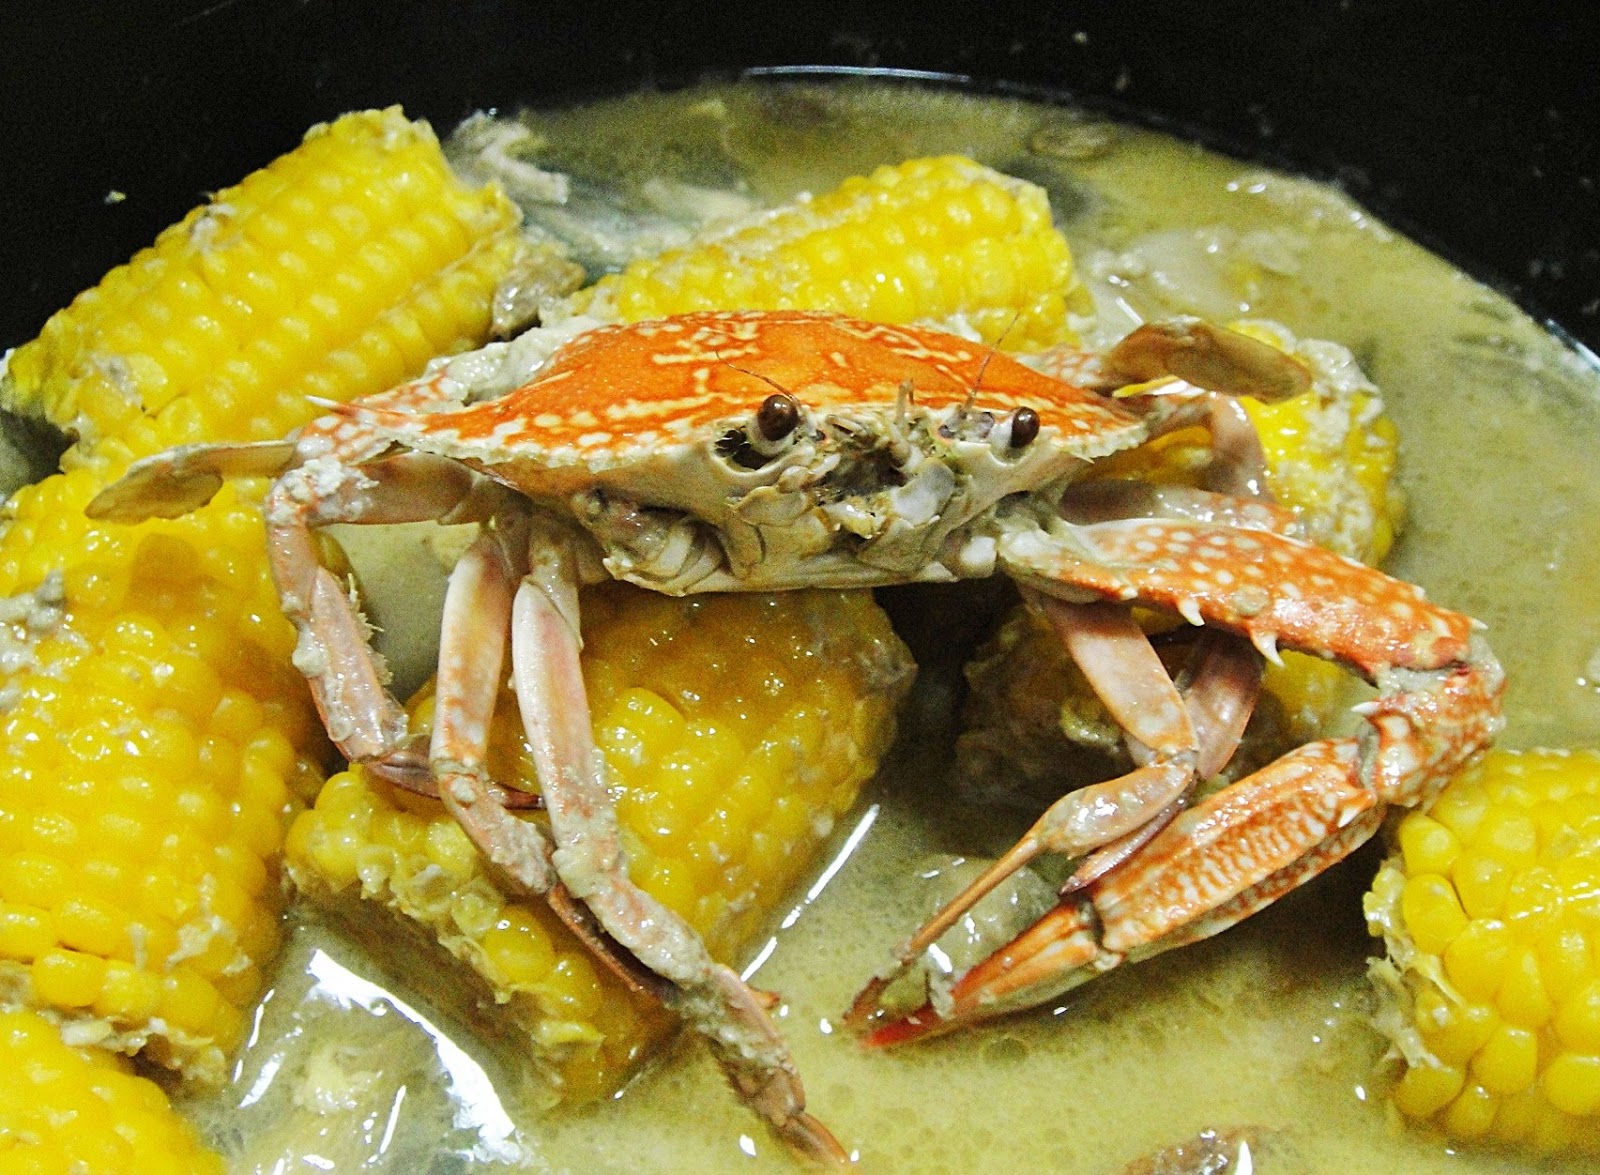 Maryam's Culinary Wonders: 886. Coconut Steamed Crabs